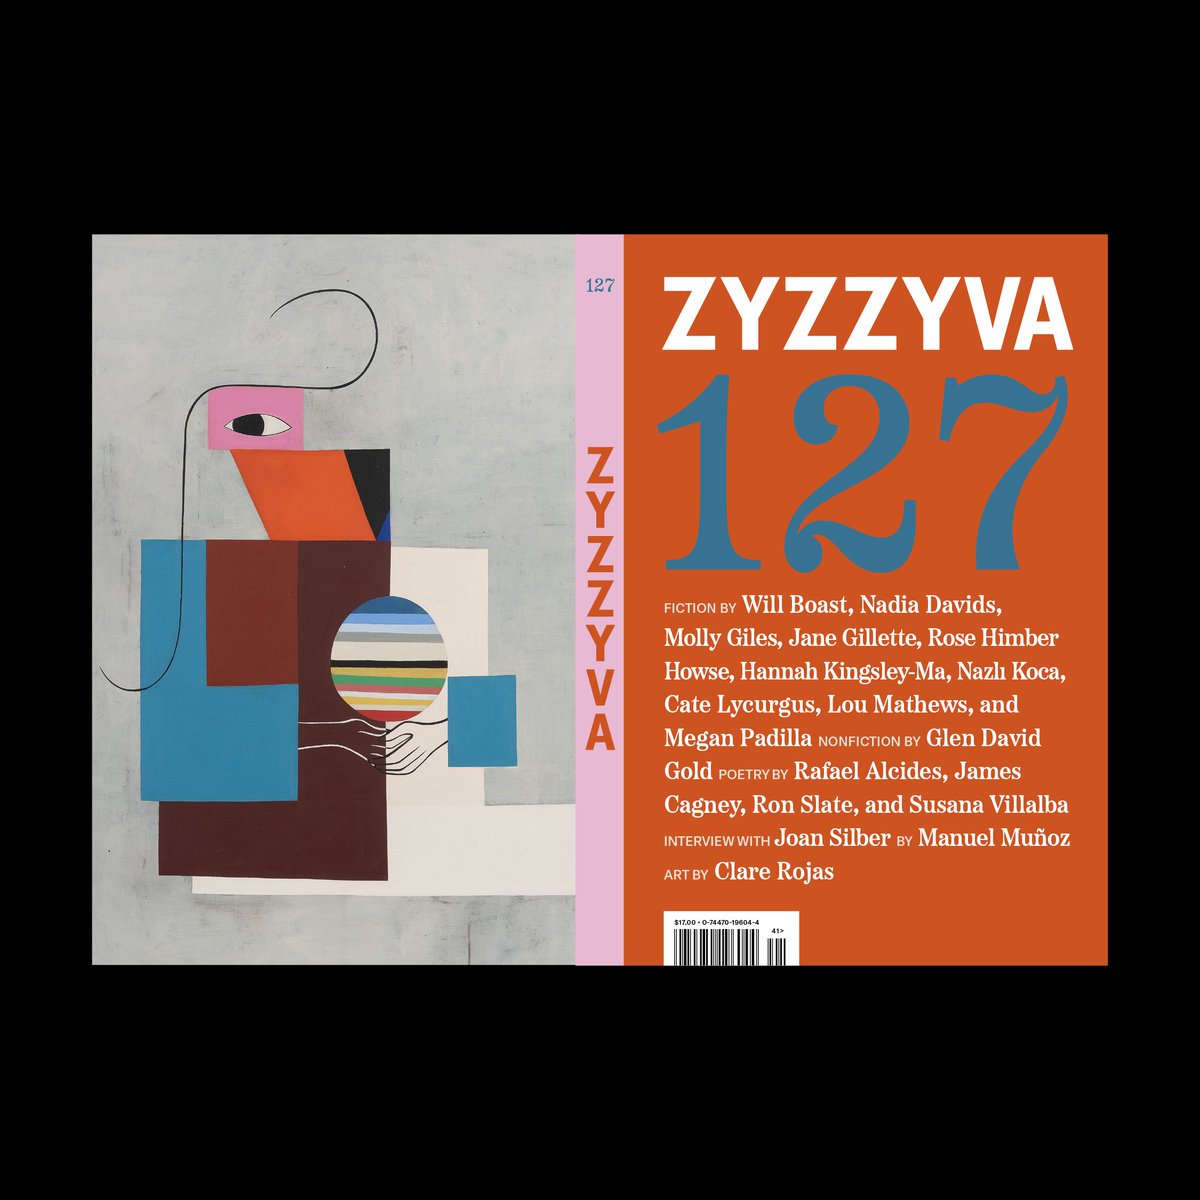 We’ve redesigned ZYZZYVA! Here is our bold new look on Issue No. 127. We hope you love it as much as we do. You can order it here: zyzzyva.org/product/zyzzyv…